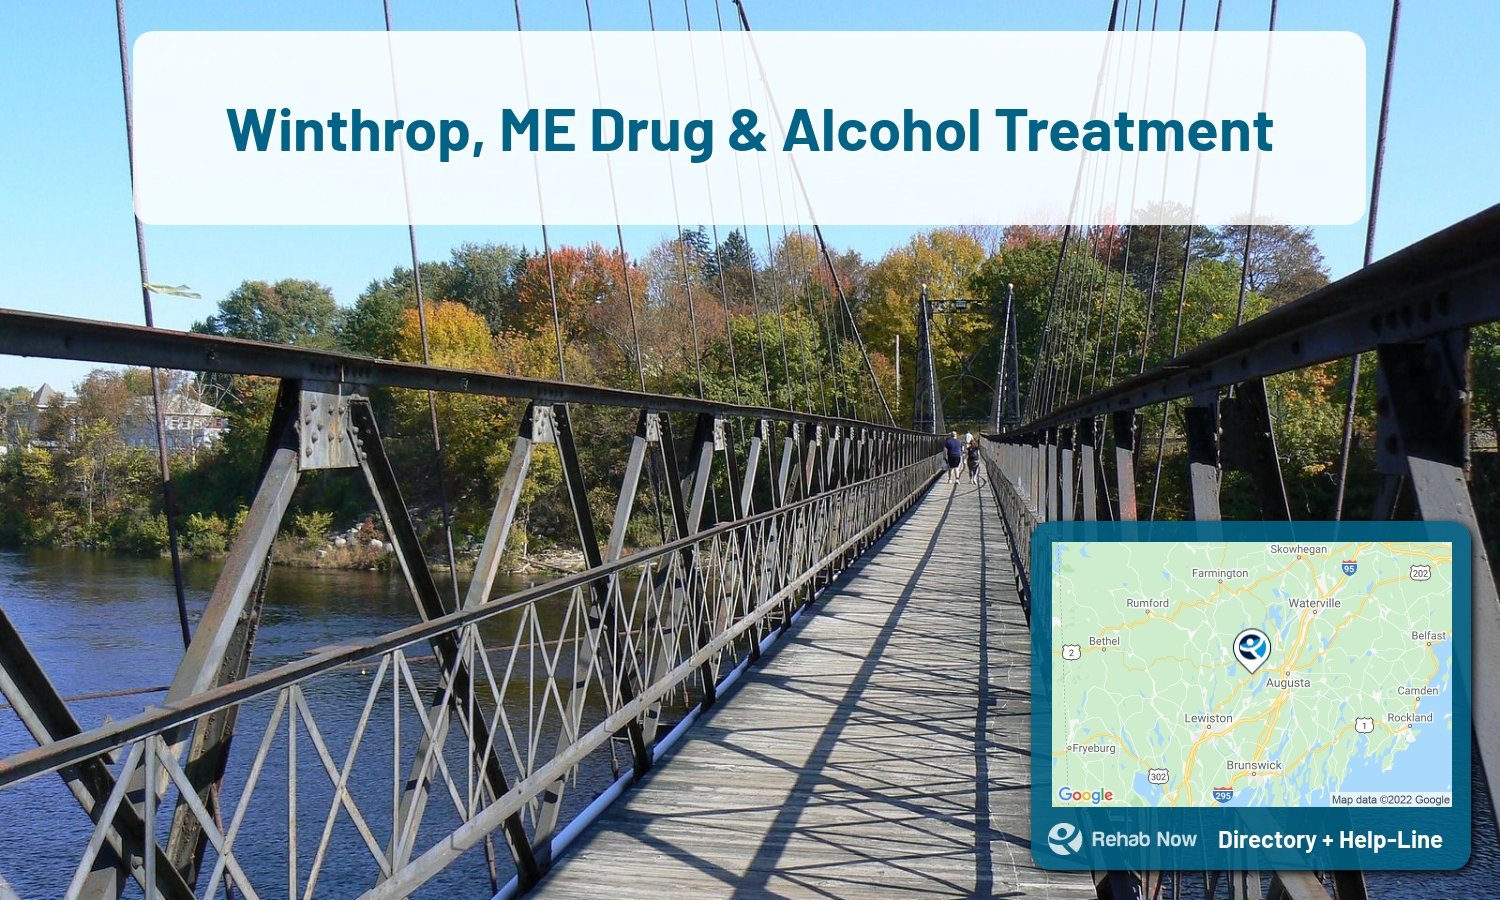 Our experts can help you find treatment now in Winthrop, Maine. We list drug rehab and alcohol centers in Maine.